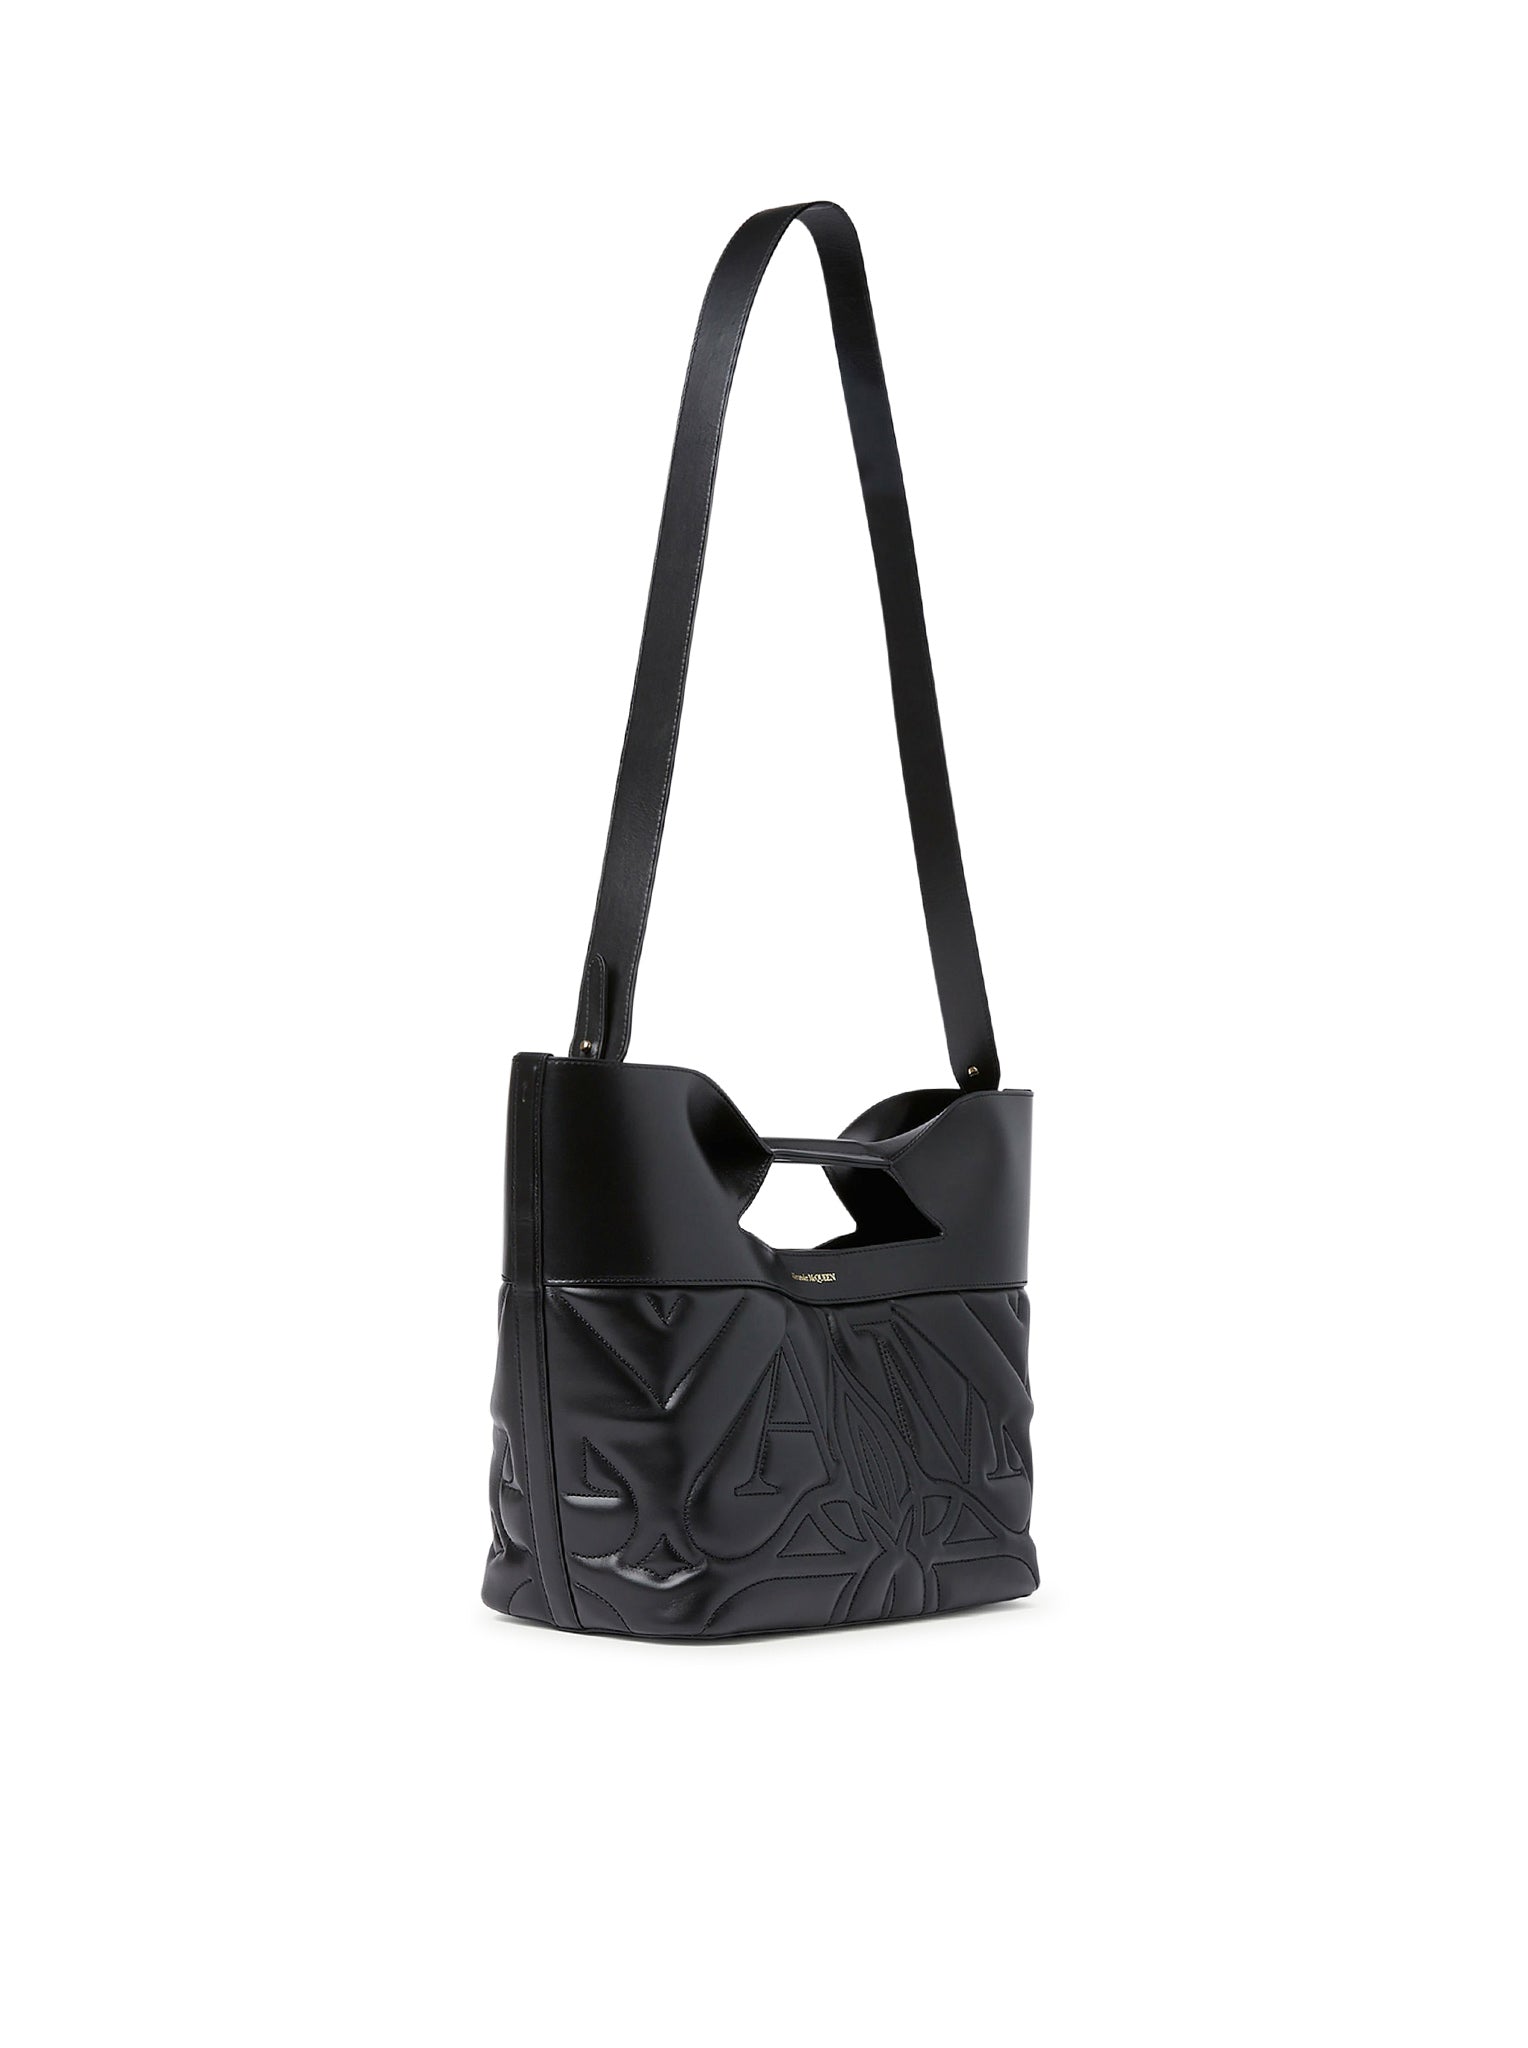 The Bow Small Bag for Women